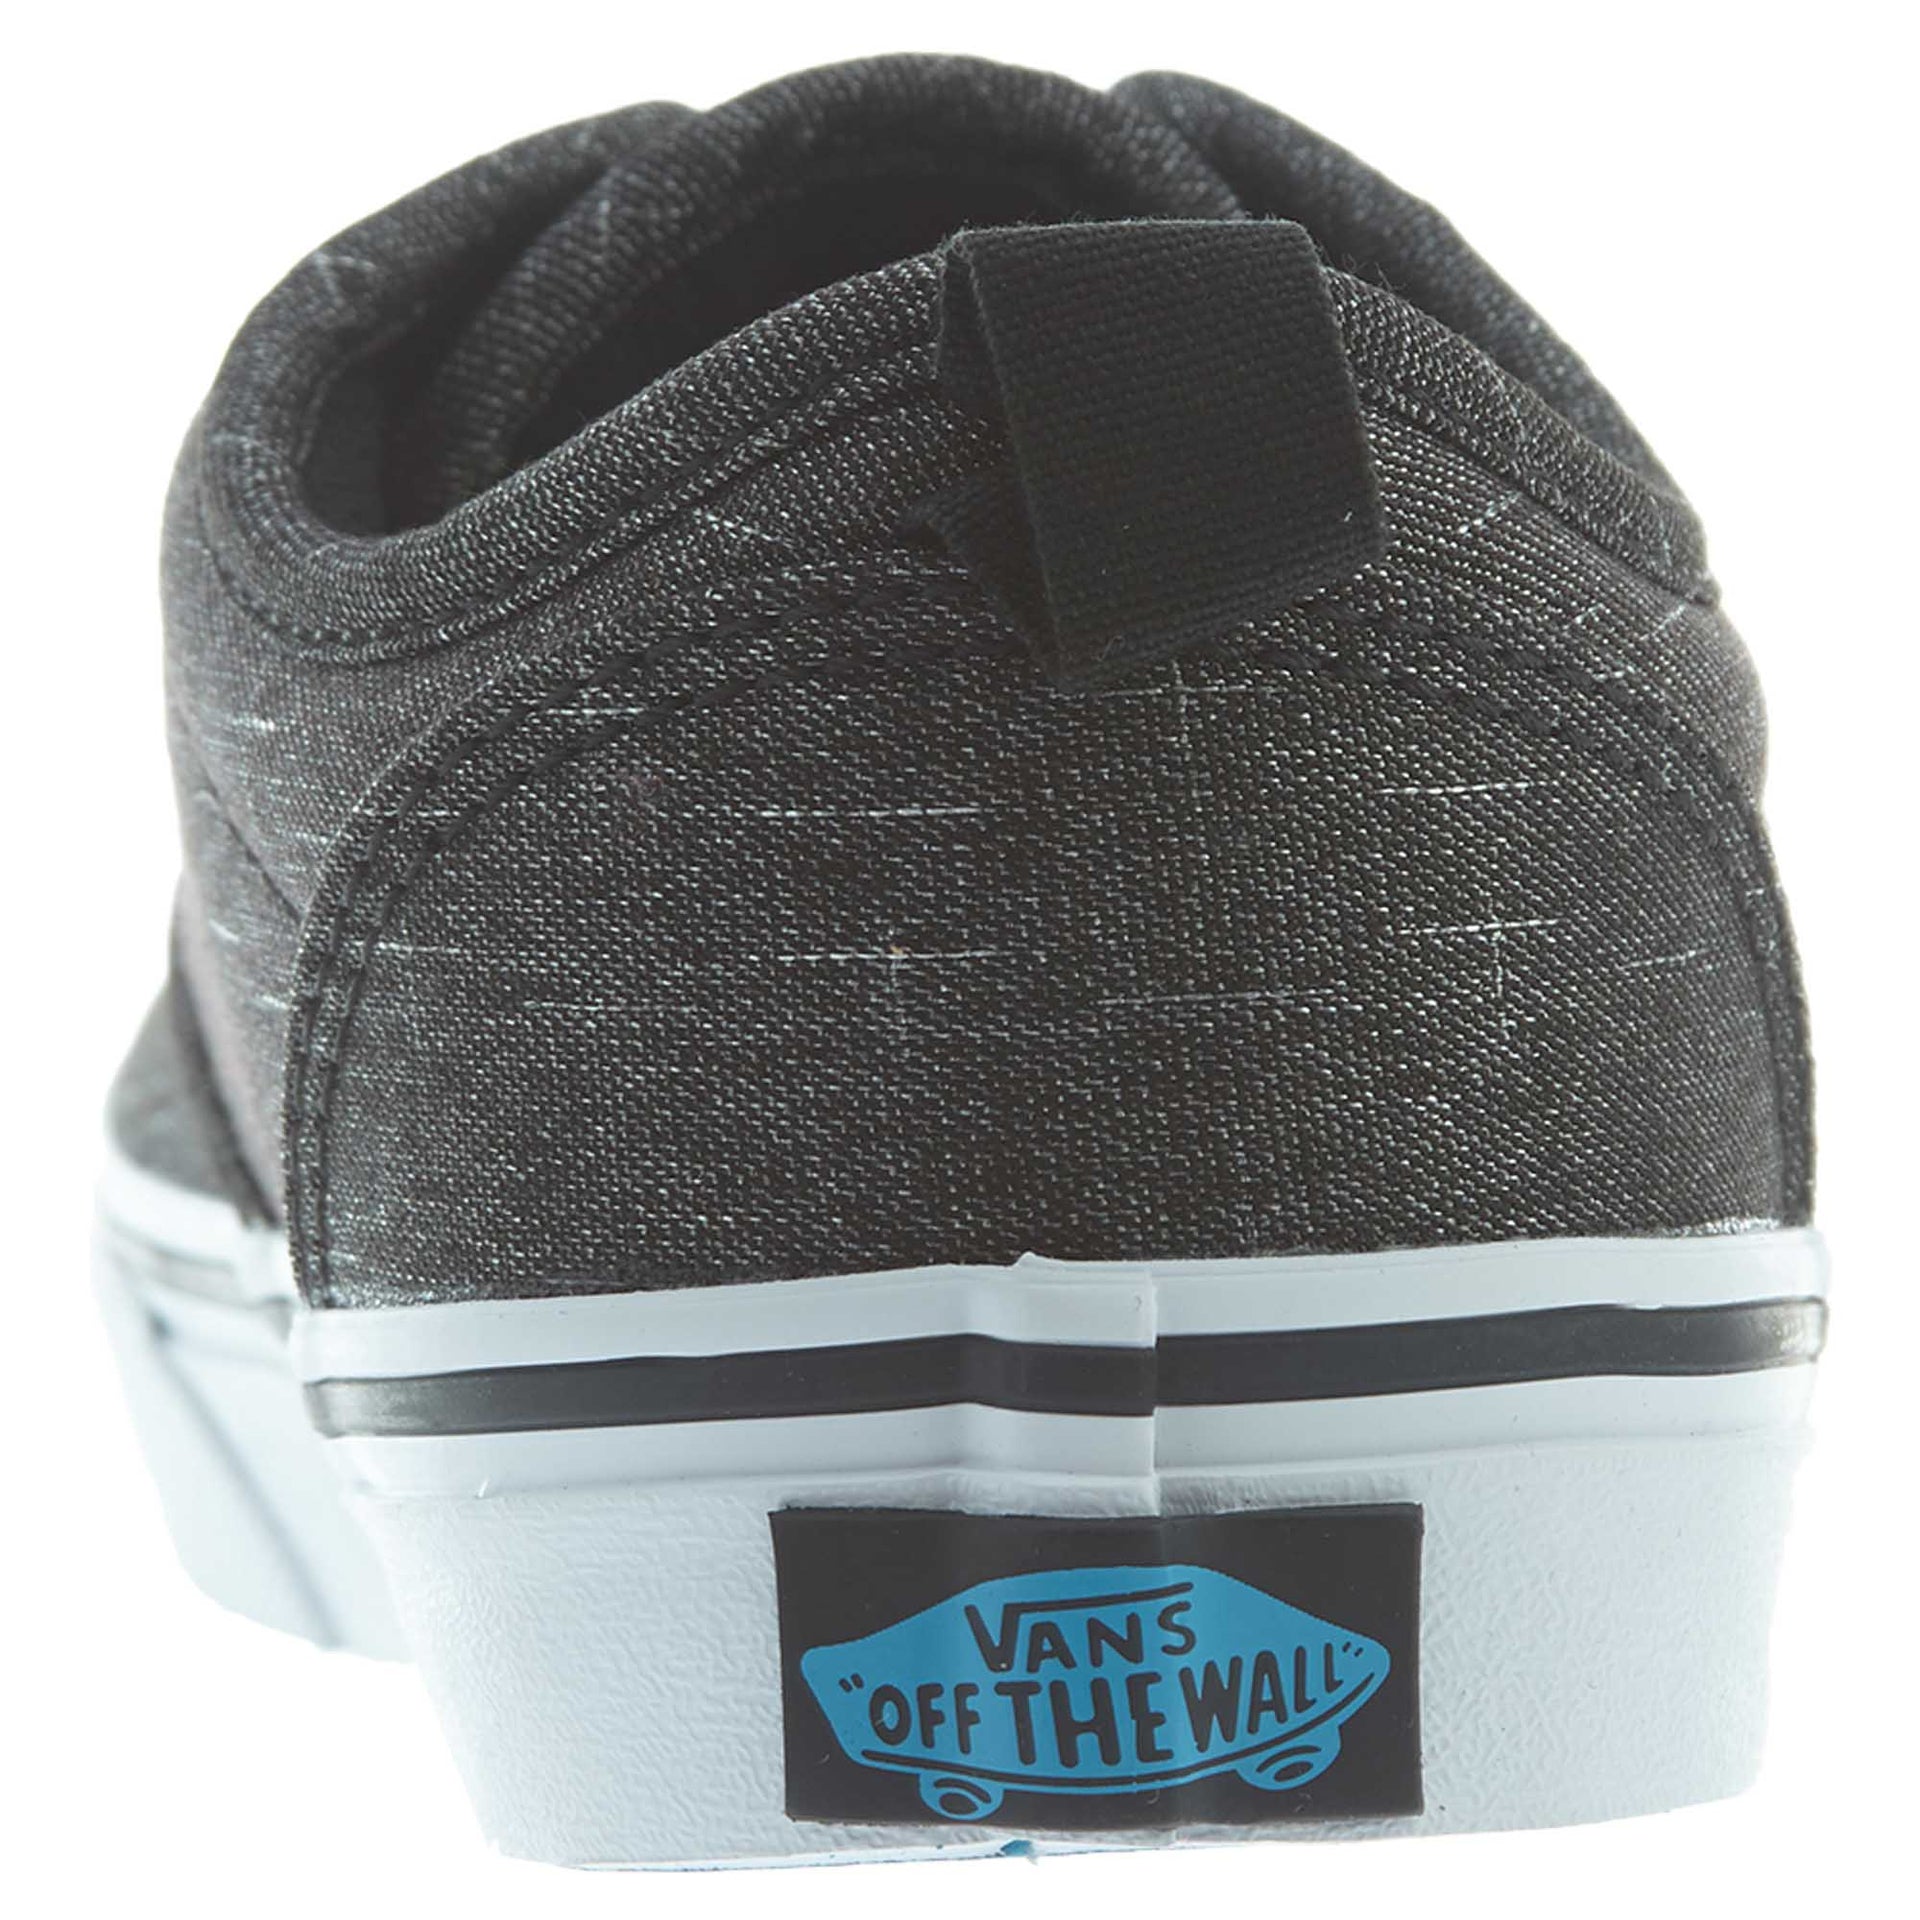 Vans Atwood Slip-on (Textile) Little Kids Style : Vn0004lm-FN8